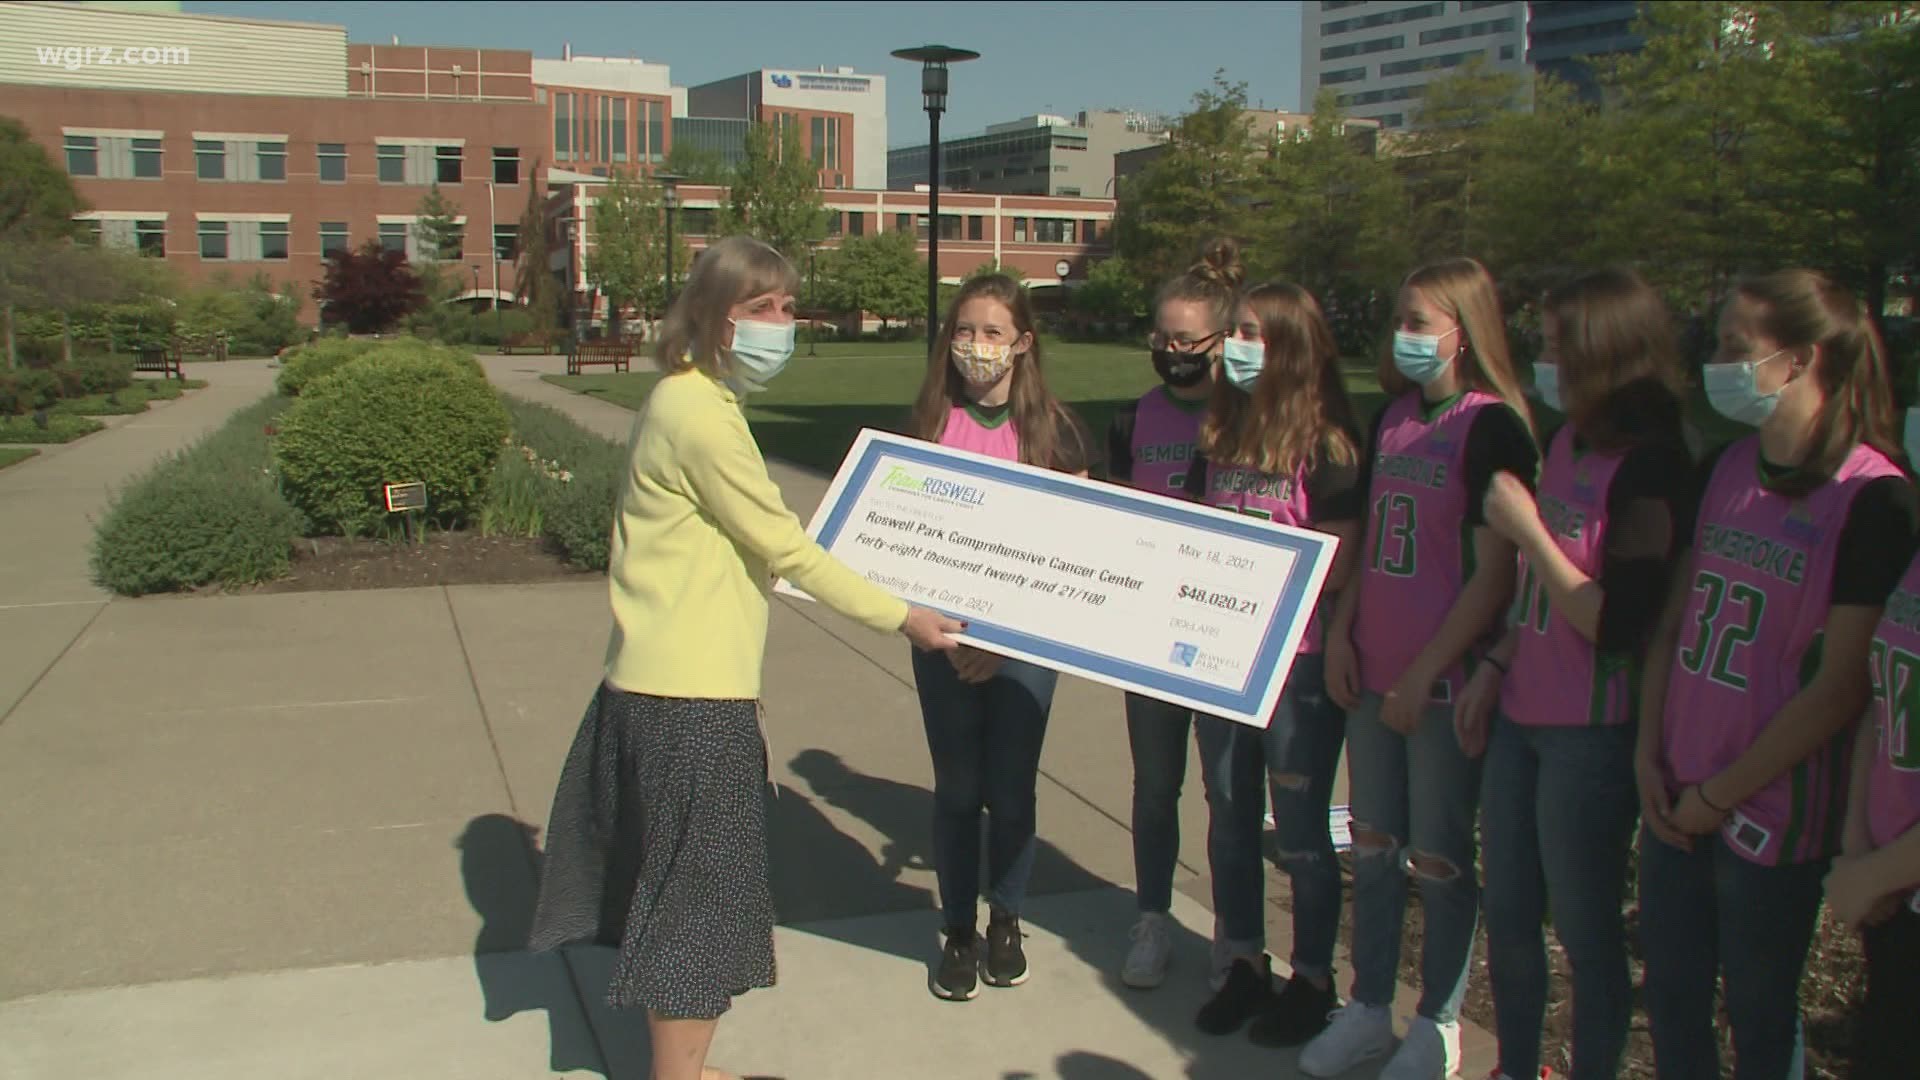 The girls of Pembroke basketball were at Roswell Park today to hand over a check for 48-thousand dollars...